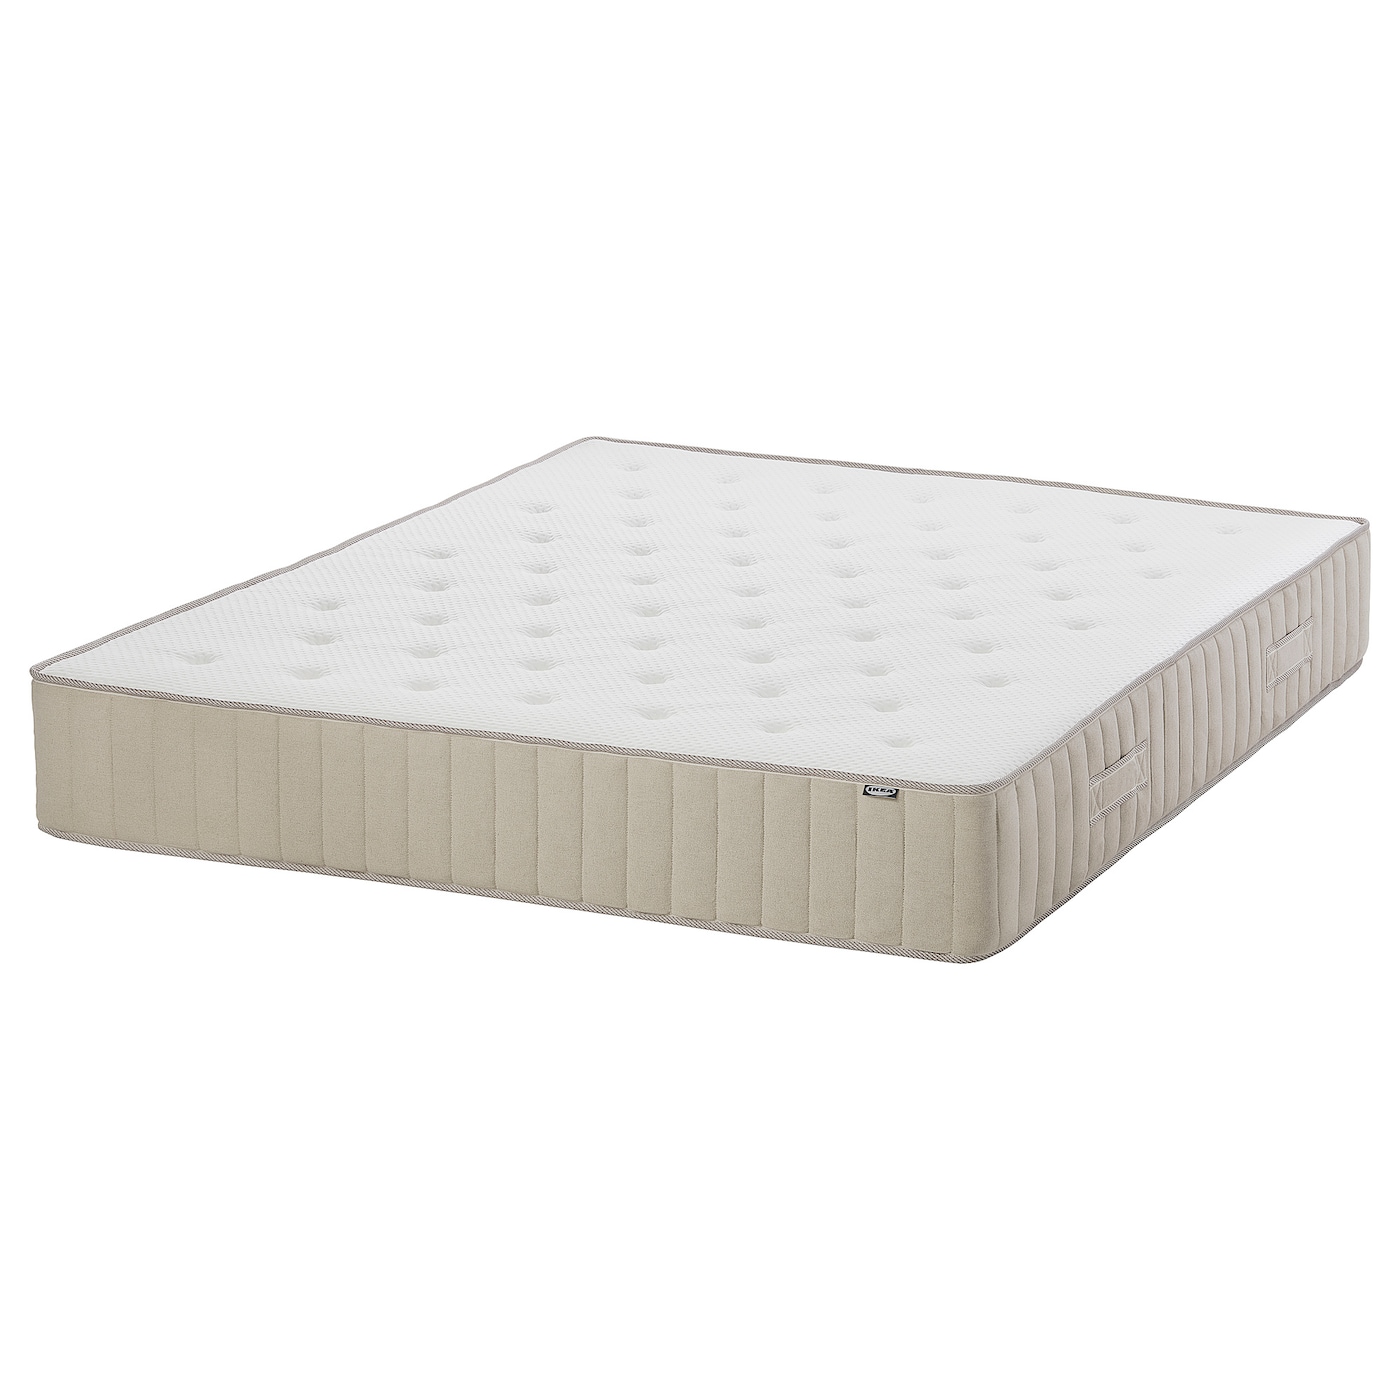 Morgedal mattress: Exploring the Features of this插图4